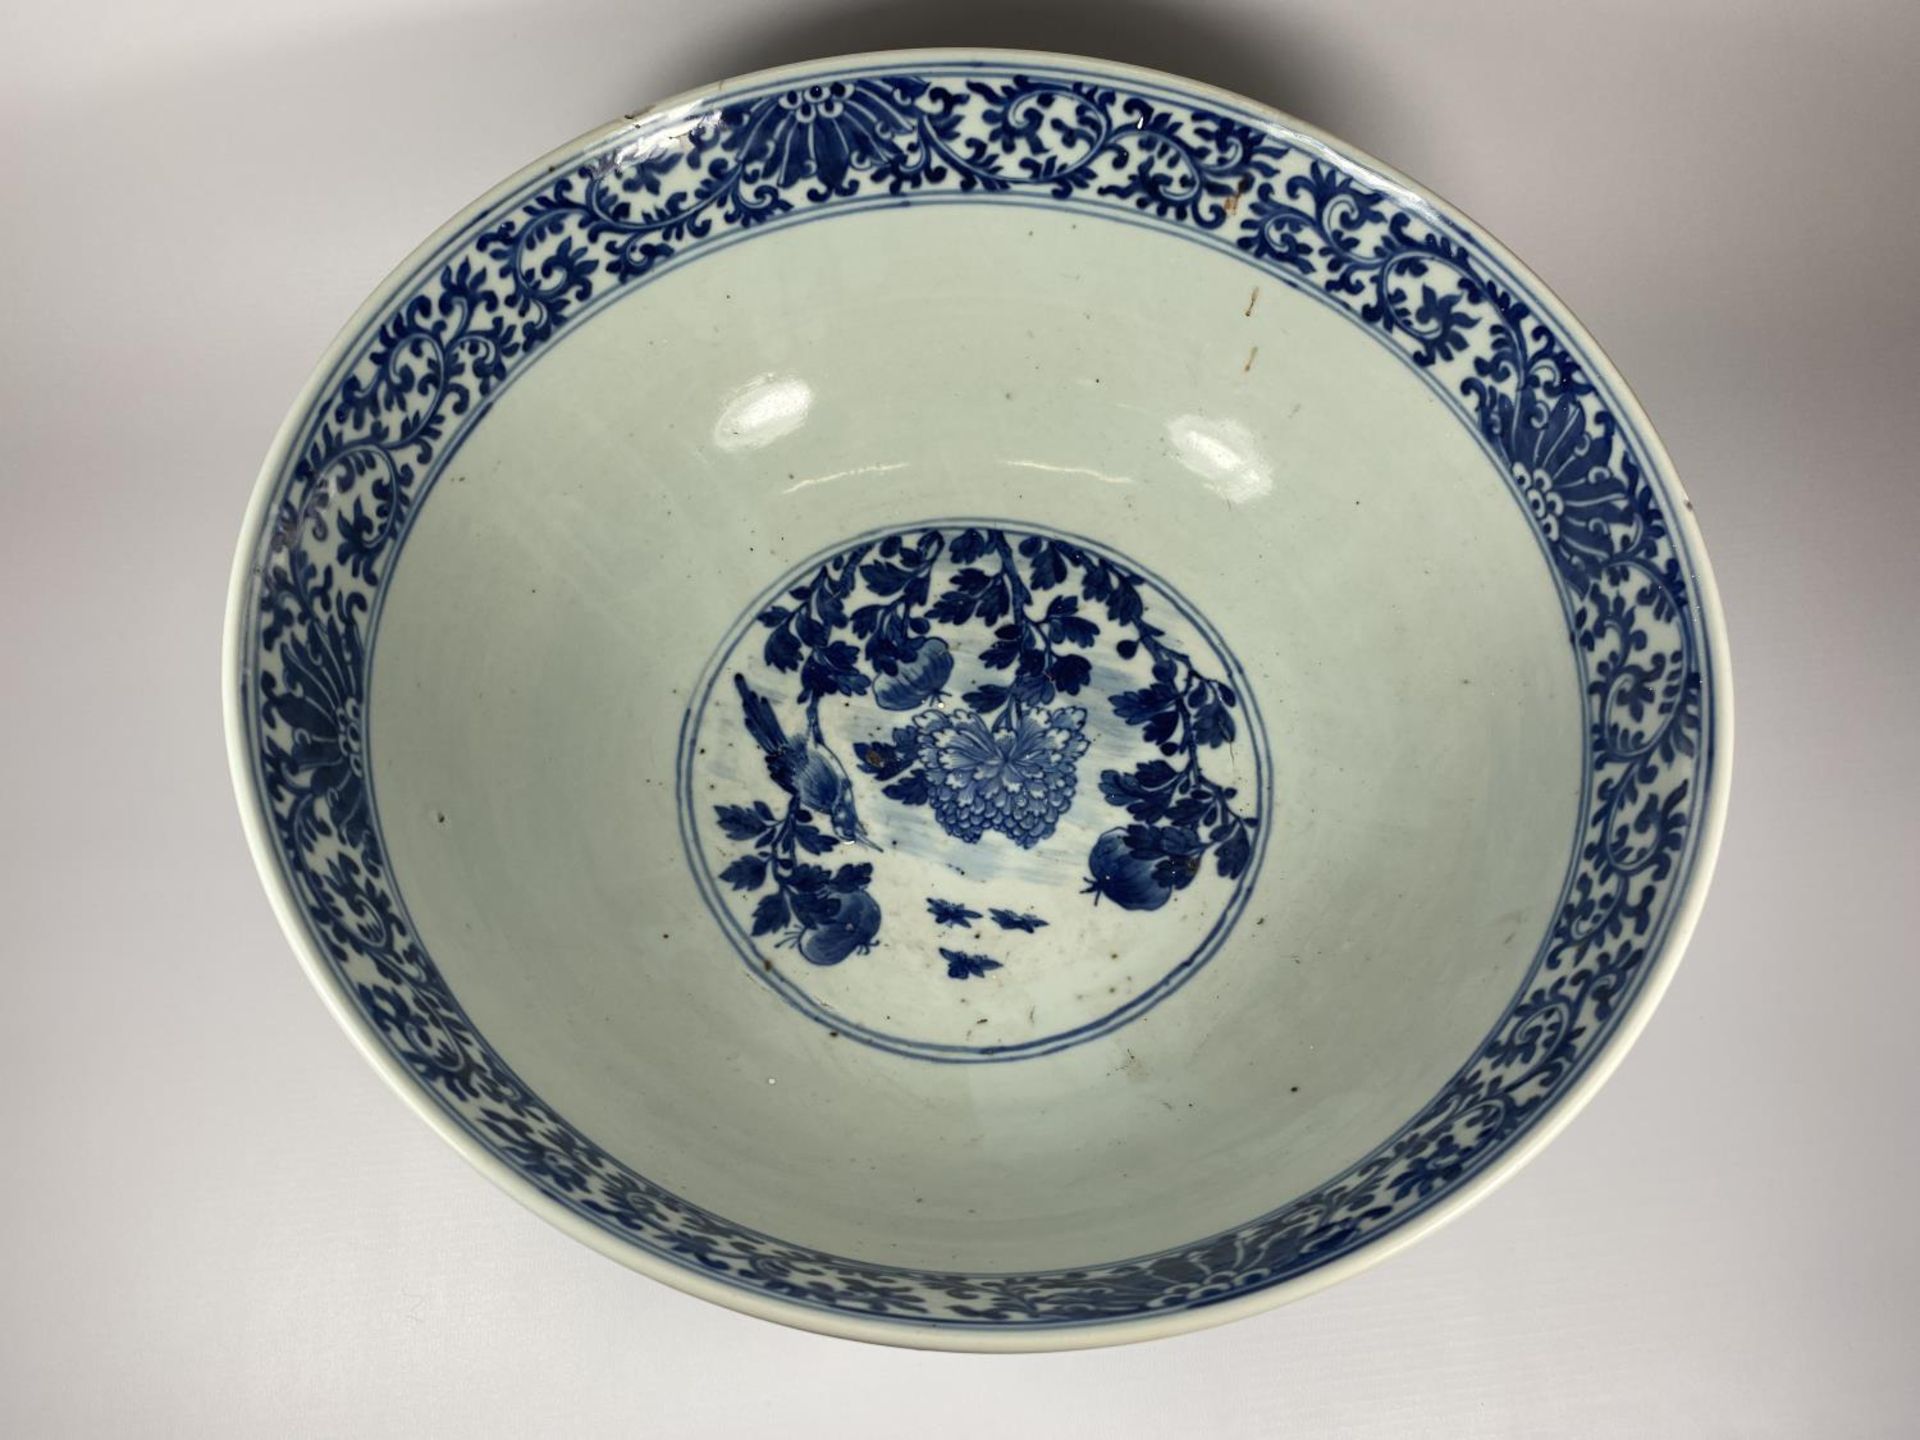 A LARGE AND IMPRESSIVE EARLY 19TH CENTURY CHINESE QING BLUE AND WHITE PORCELAIN PUNCH / FRUIT BOWL - Image 3 of 14